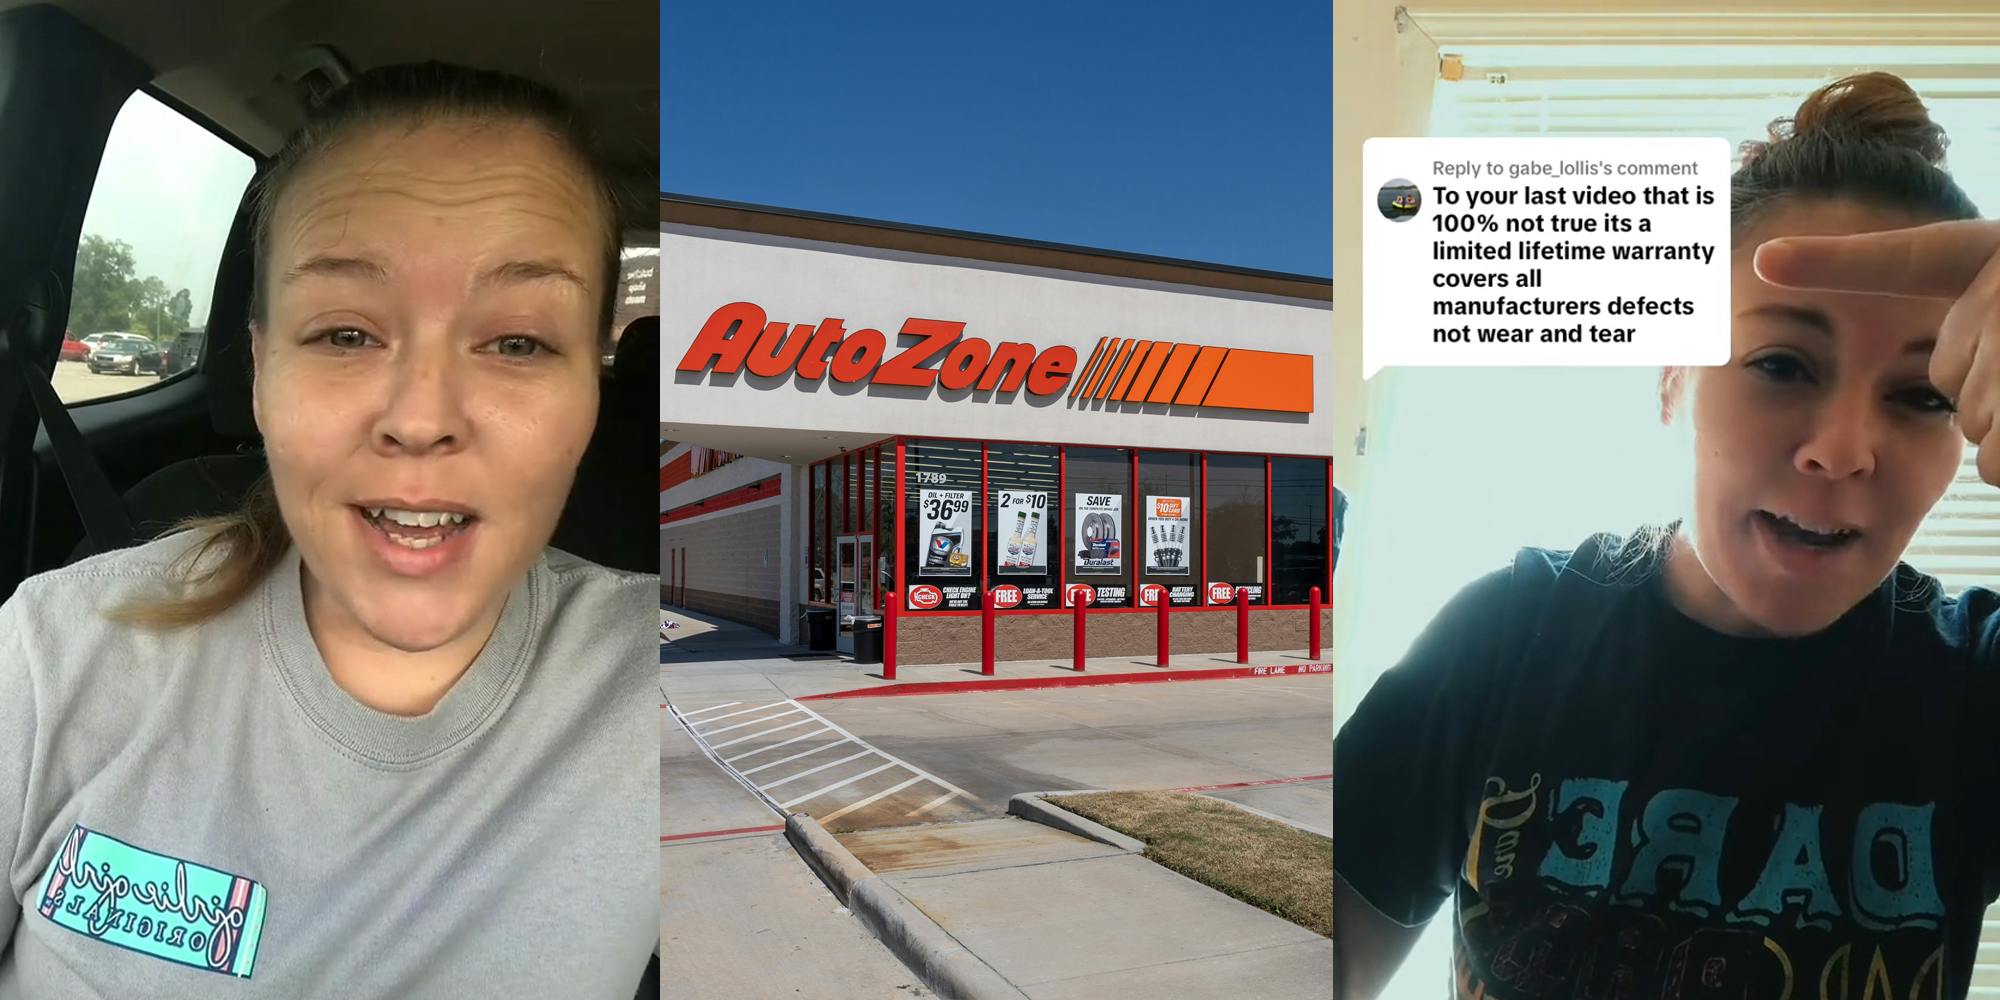 former AutoZone worker speaking in car (l) AutoZone building with sign (c) former AutoZone worker speaking pointing to caption "To your last video that is %100 not true its a limited lifetime warranty covers all manufactures defects not wear and tear" (r)